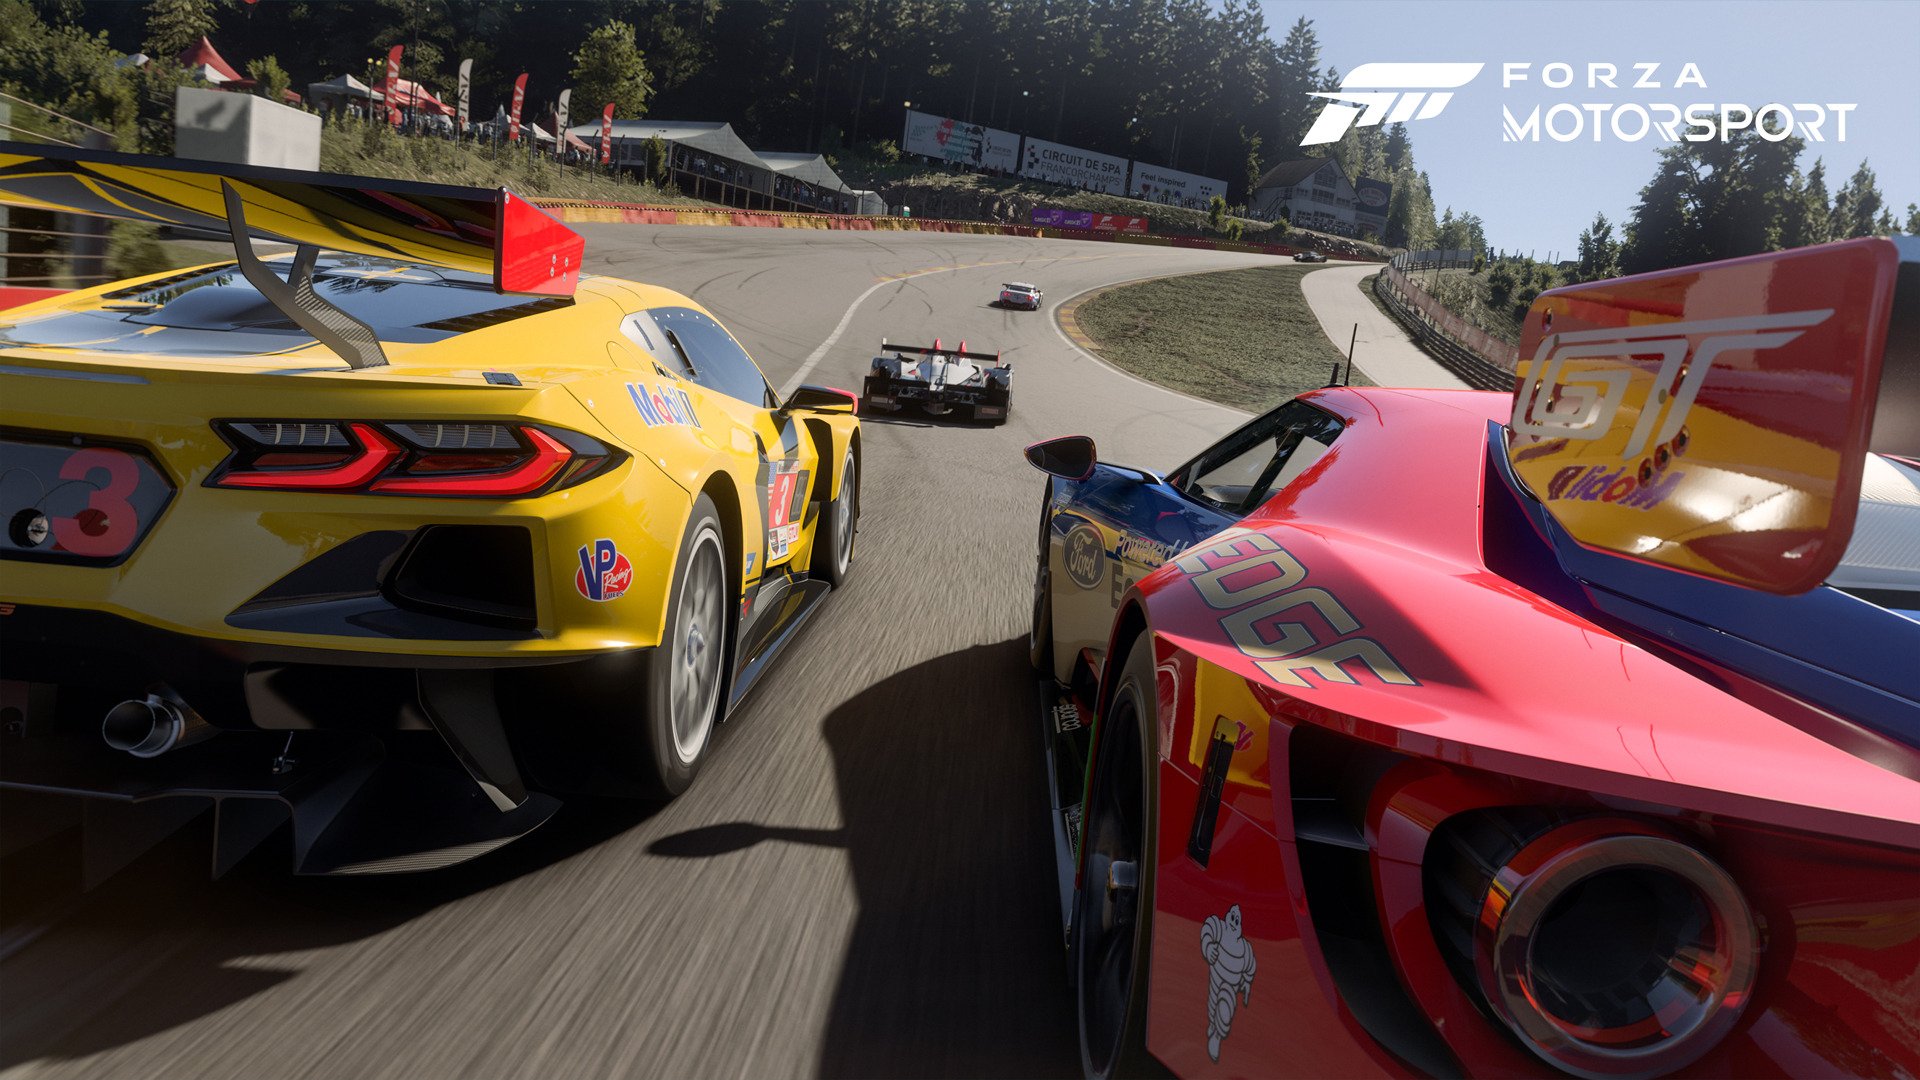 The Forza Motorsport 5 Car List Grows to 130 Vehicles